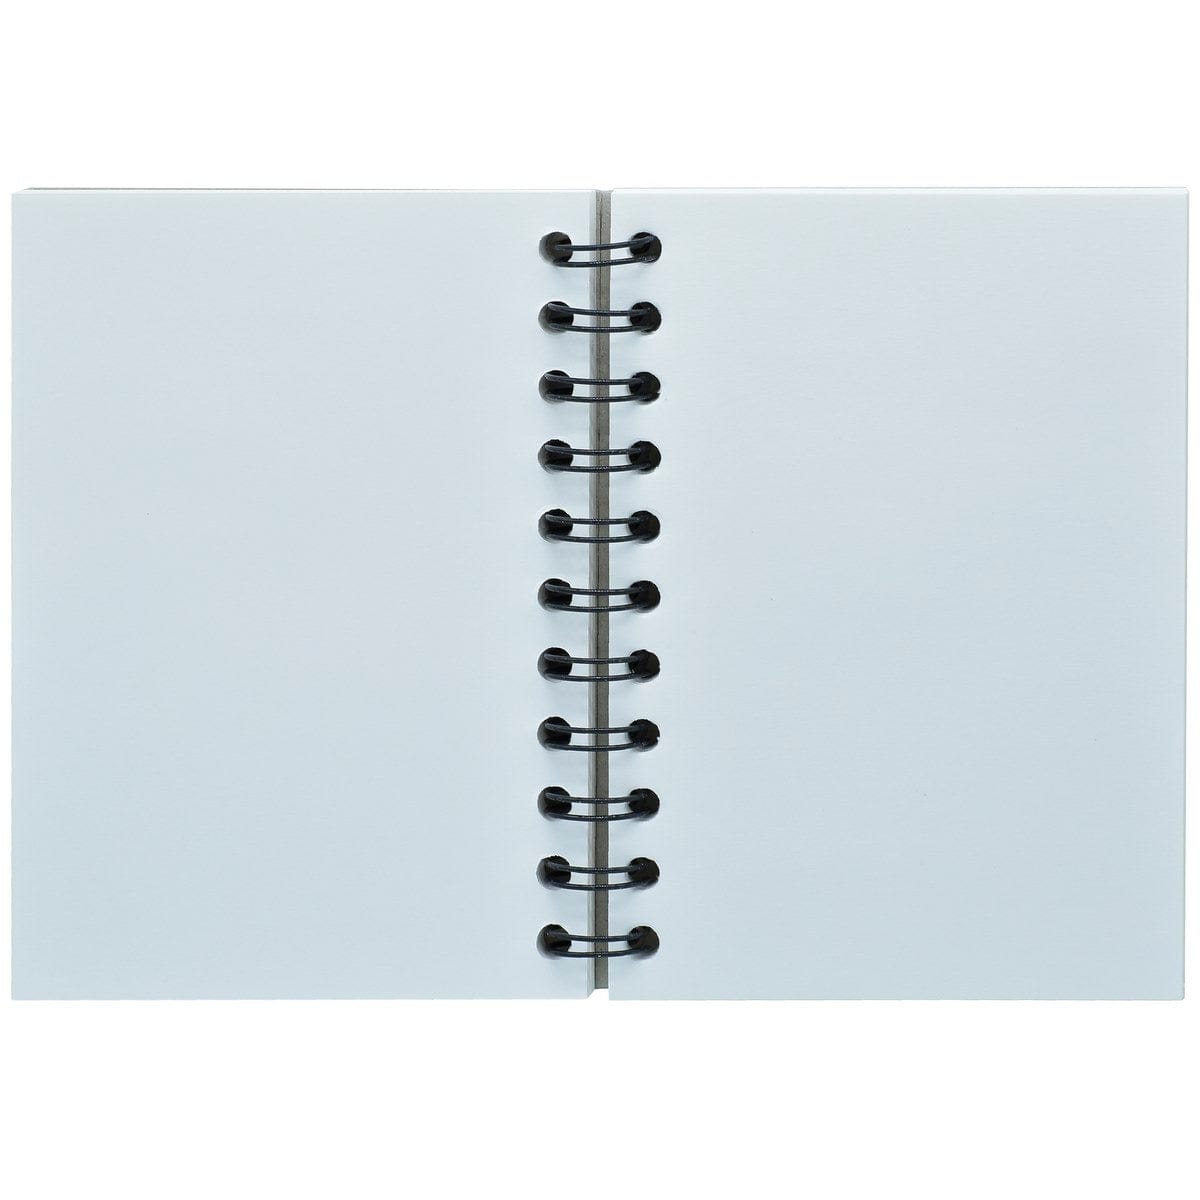 jags-mumbai Notebooks & Diaries Jags Unruled Notebook Wiro 192Sheet 96Pages 80Gsm A6 JCCPA6